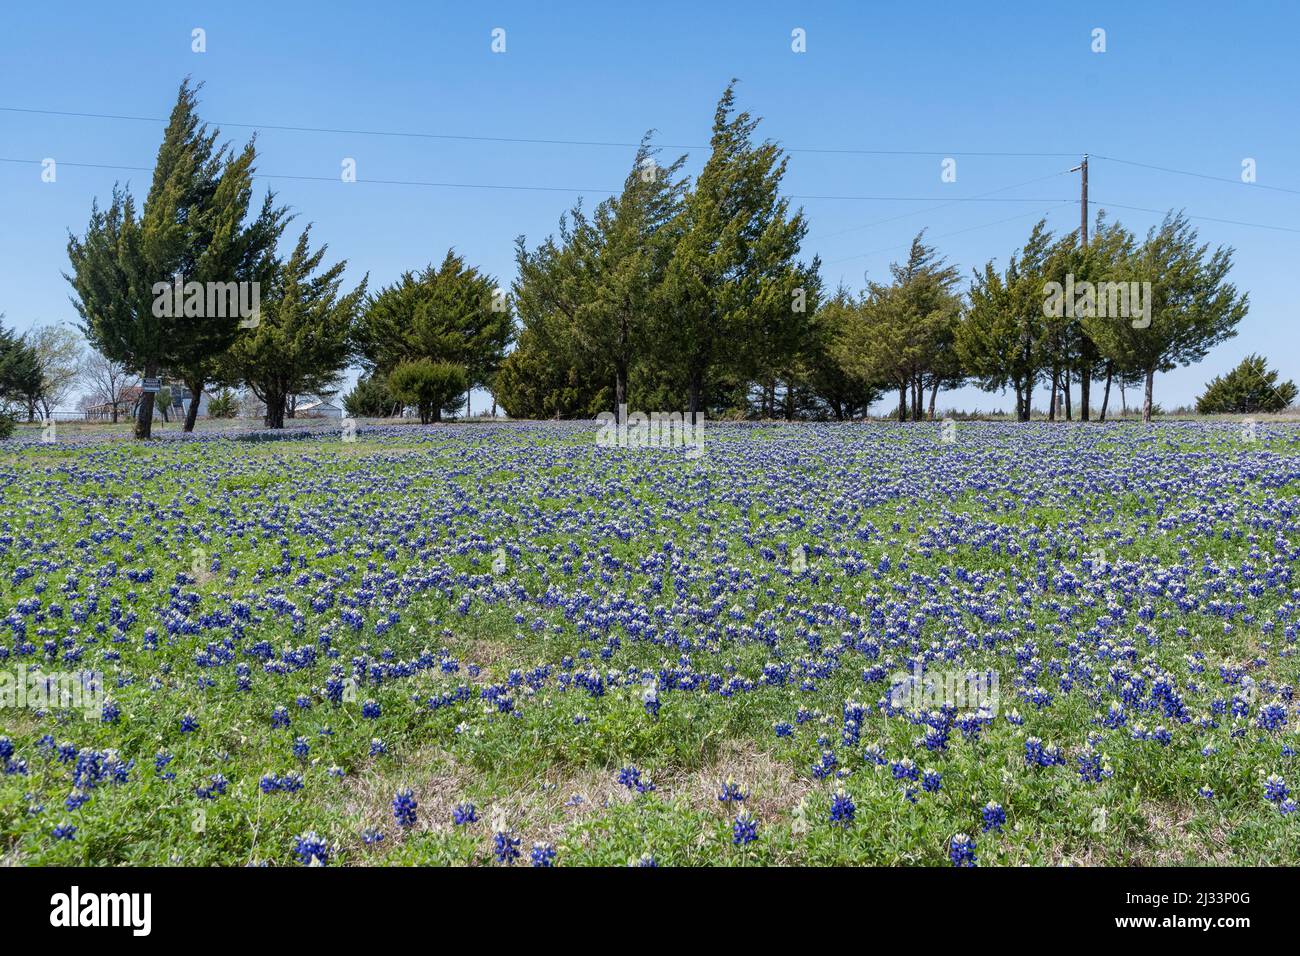 Farm meadow covered in a blanket of blooming Bluebonnet flowers with a grove of Cedar trees in the background on a sunny, spring morning. Stock Photo